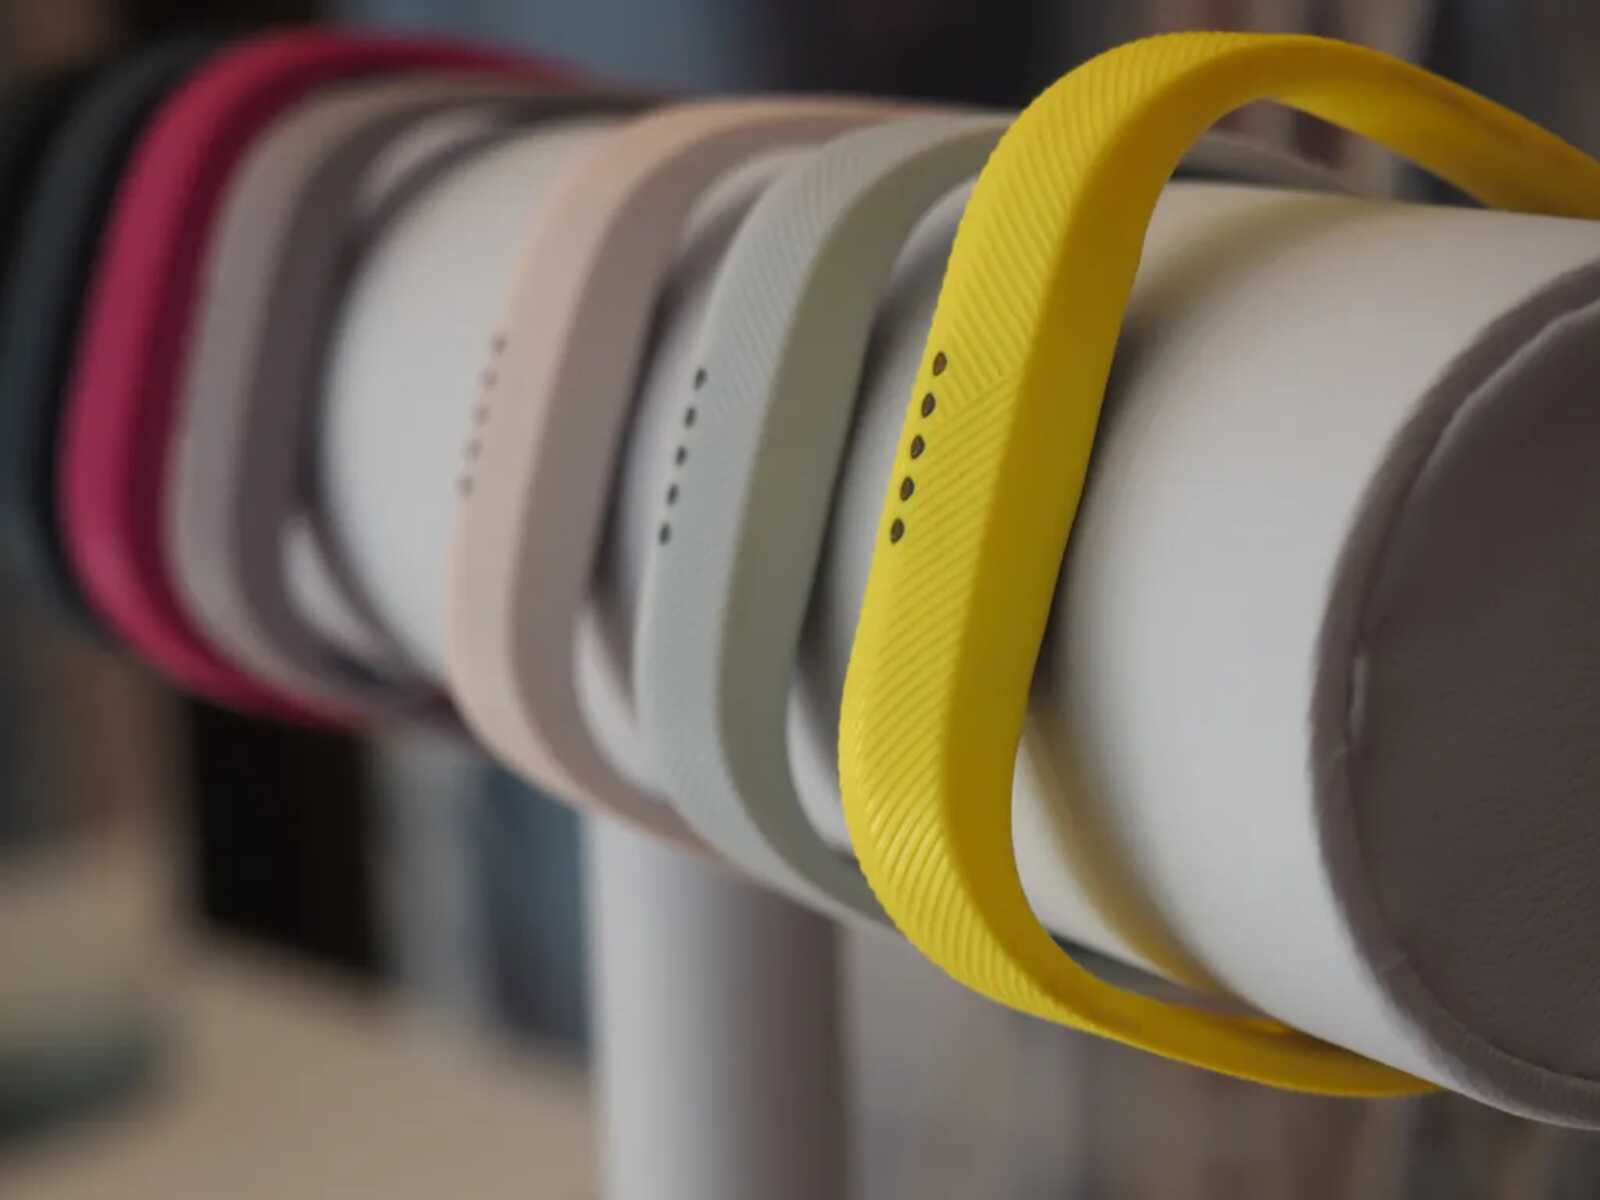 Power Up: Turning On Your Fitbit Flex